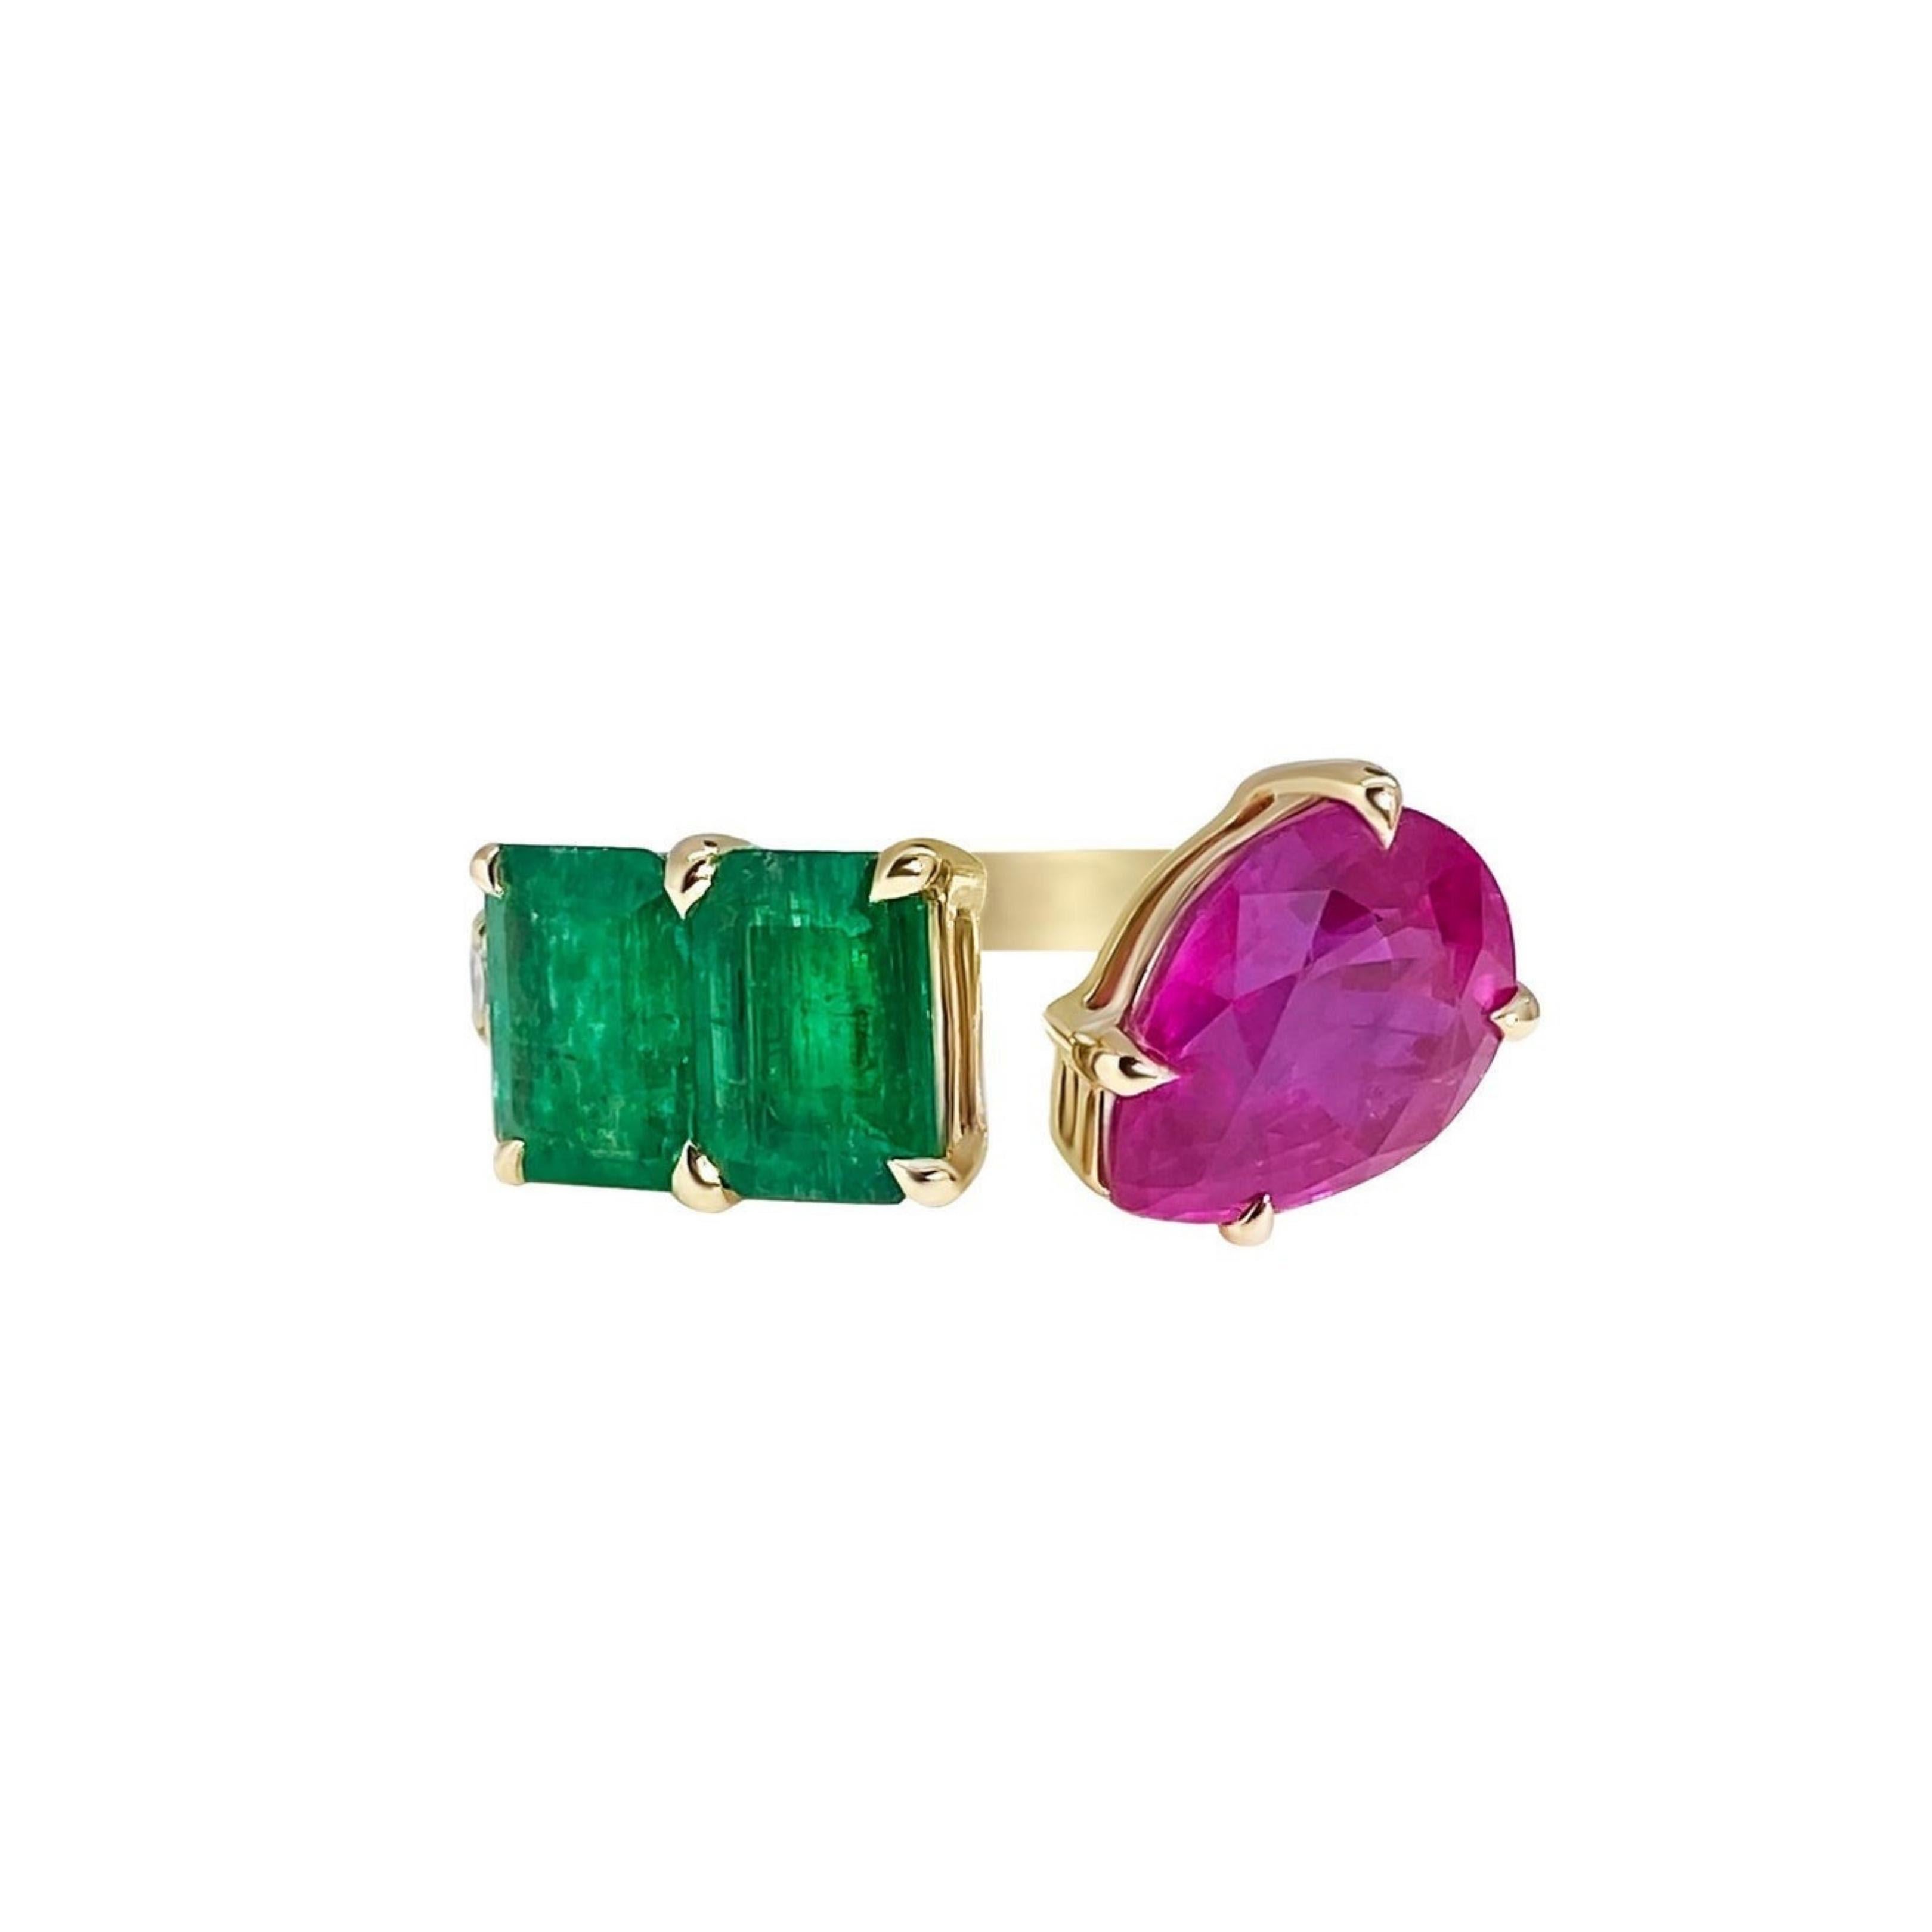 This ring design focuses on mixed gem shapes and vivid colors. The three stones were designed to float on your finger. The 2.57ct pear shaped pinkish red ruby is a natural heated ruby from Thailand. The emeralds are also natural emeralds in a